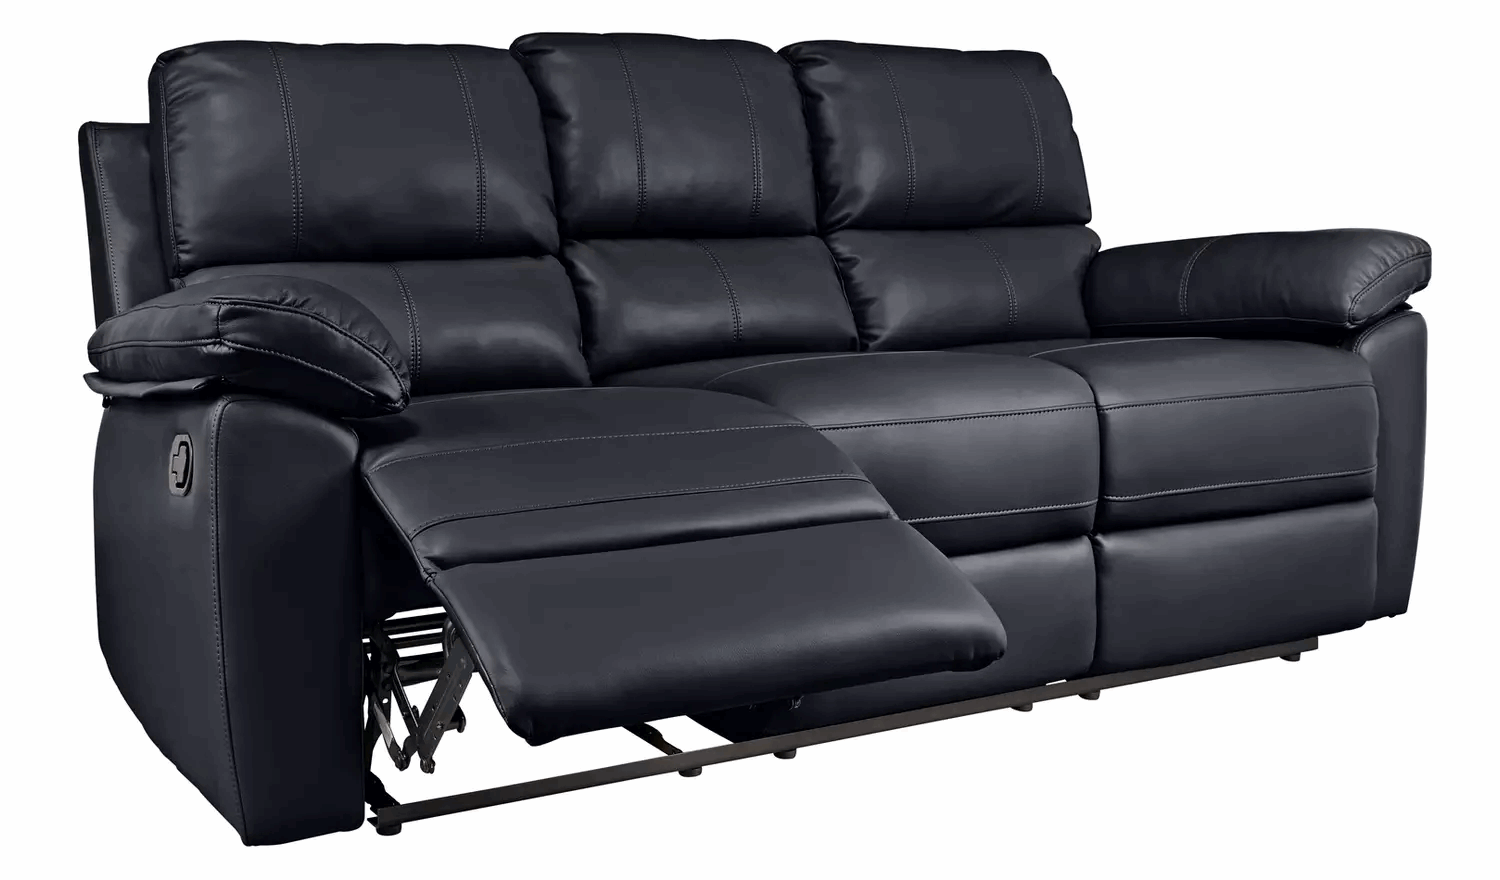 Home Toby Faux Leather 3 Seater Recliner Sofa - Black